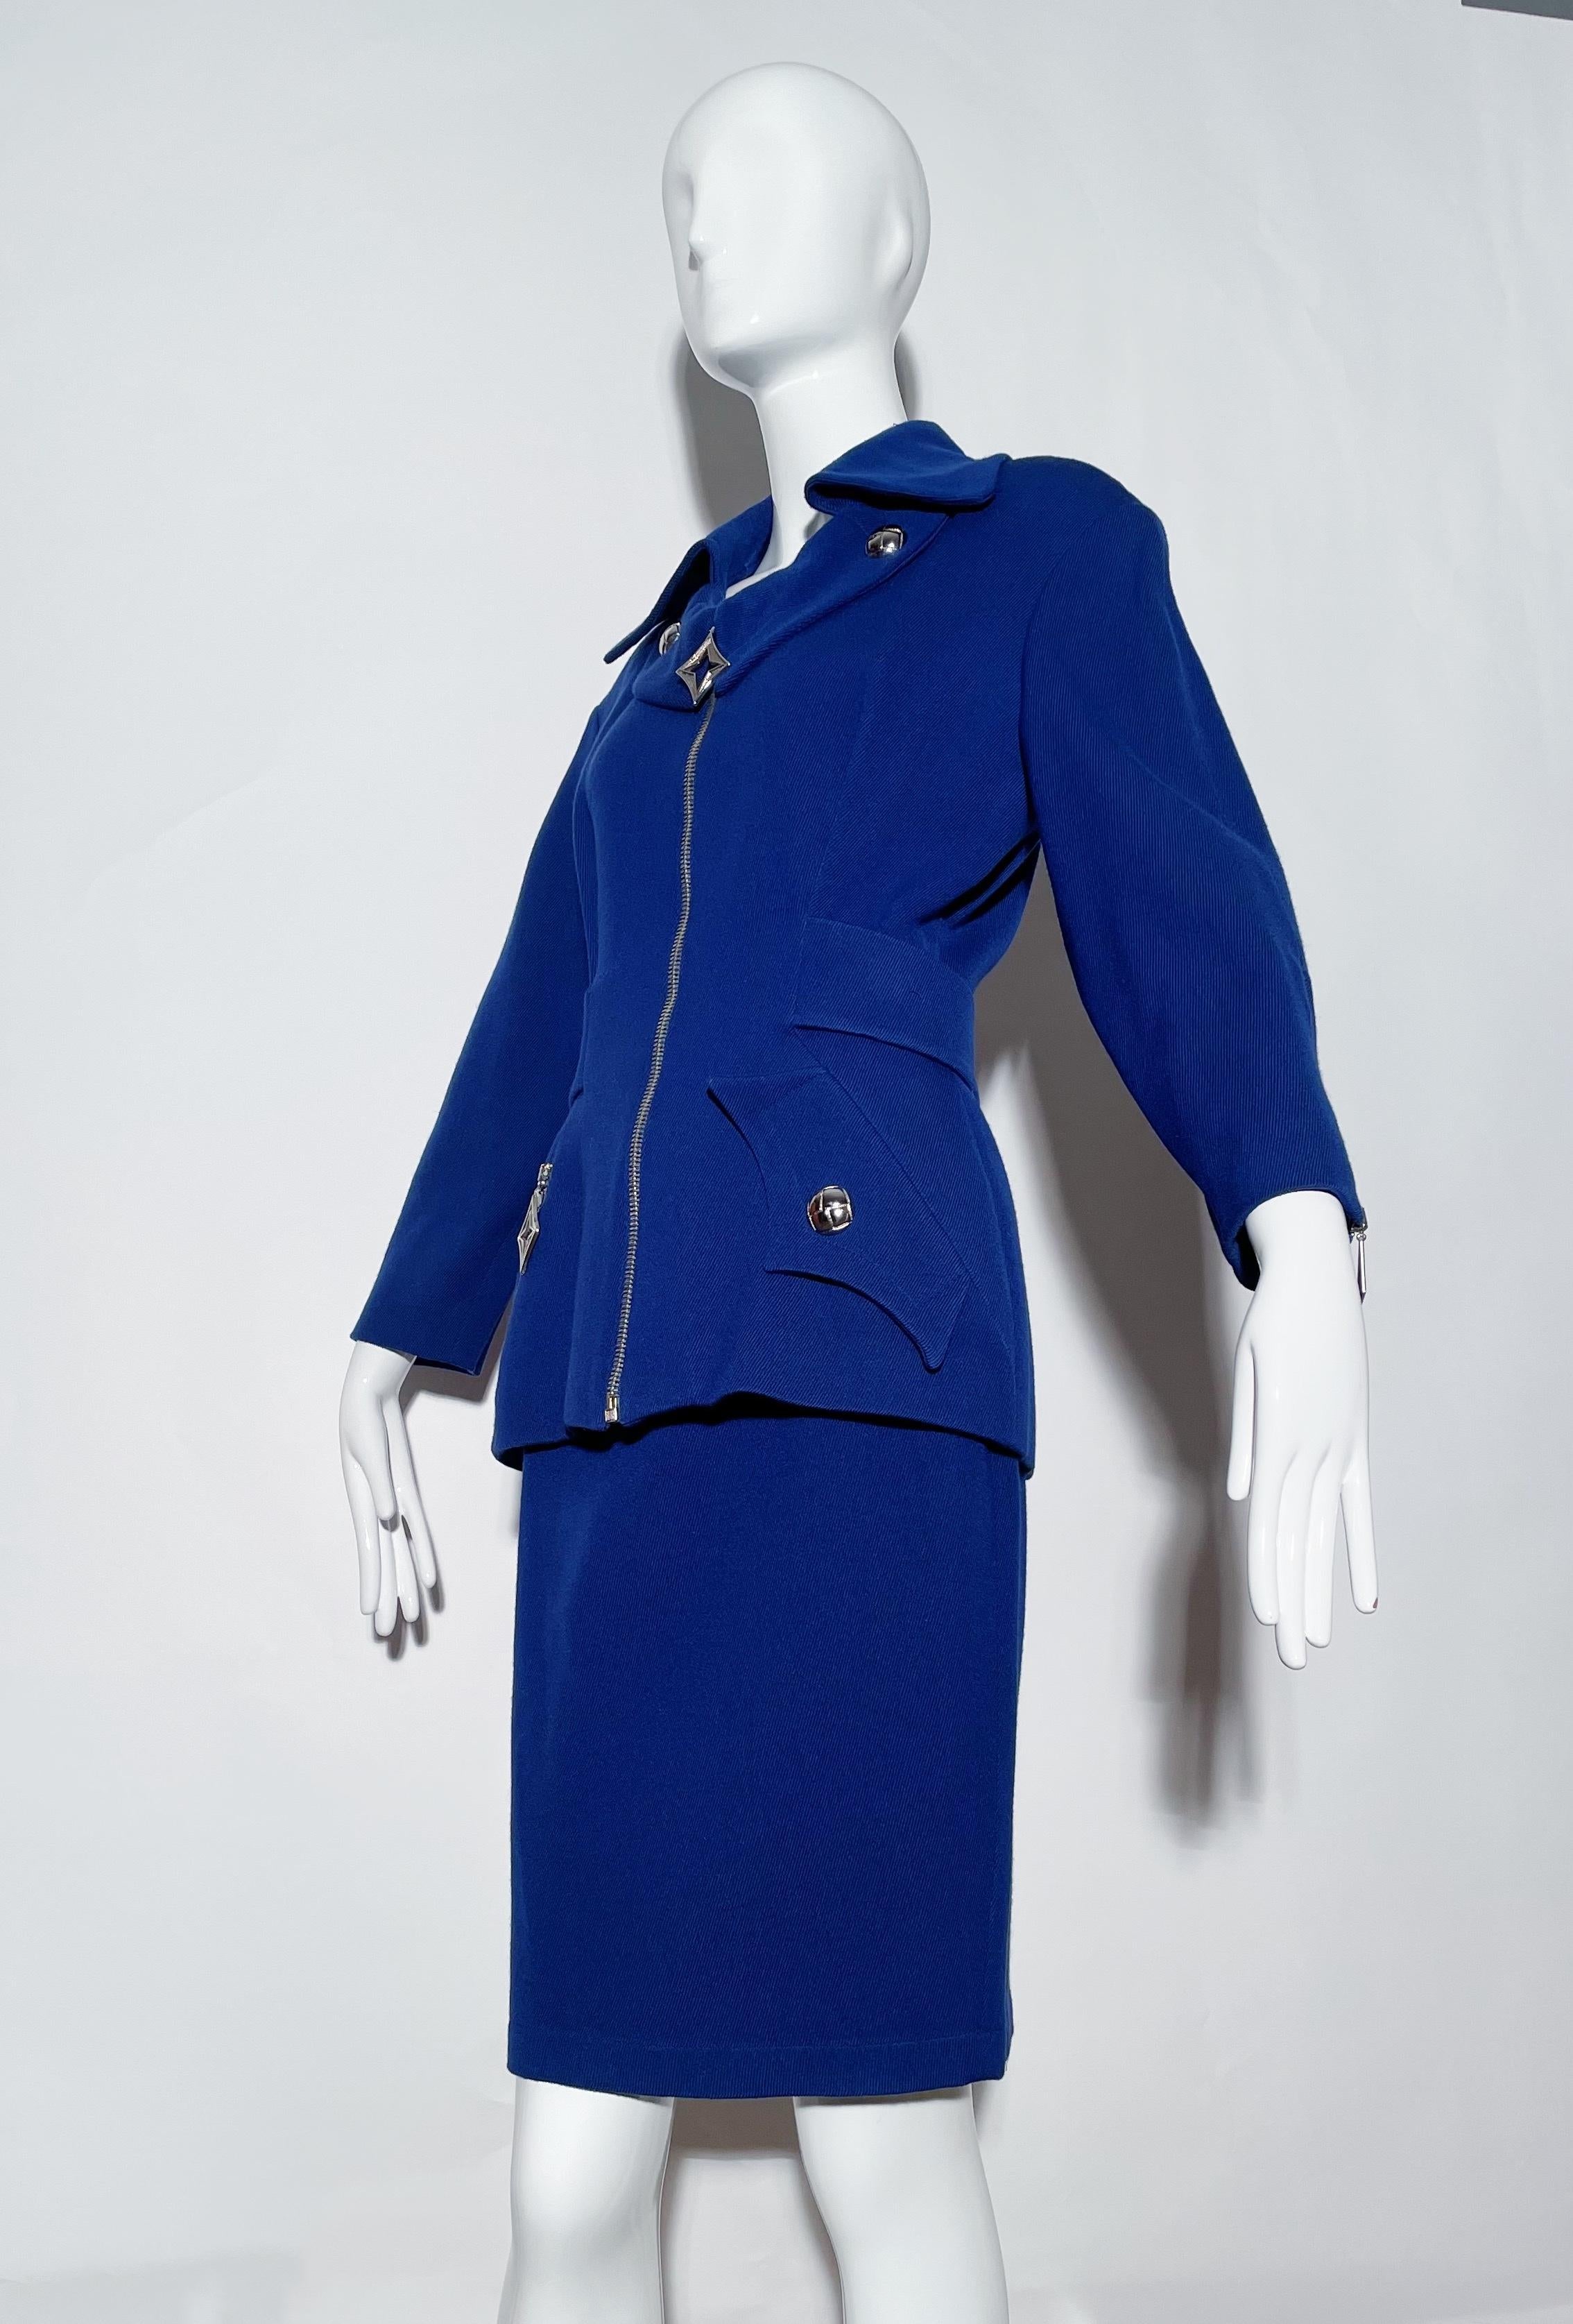 Thierry Mugler Electric Blue Skirt Suit  For Sale 3